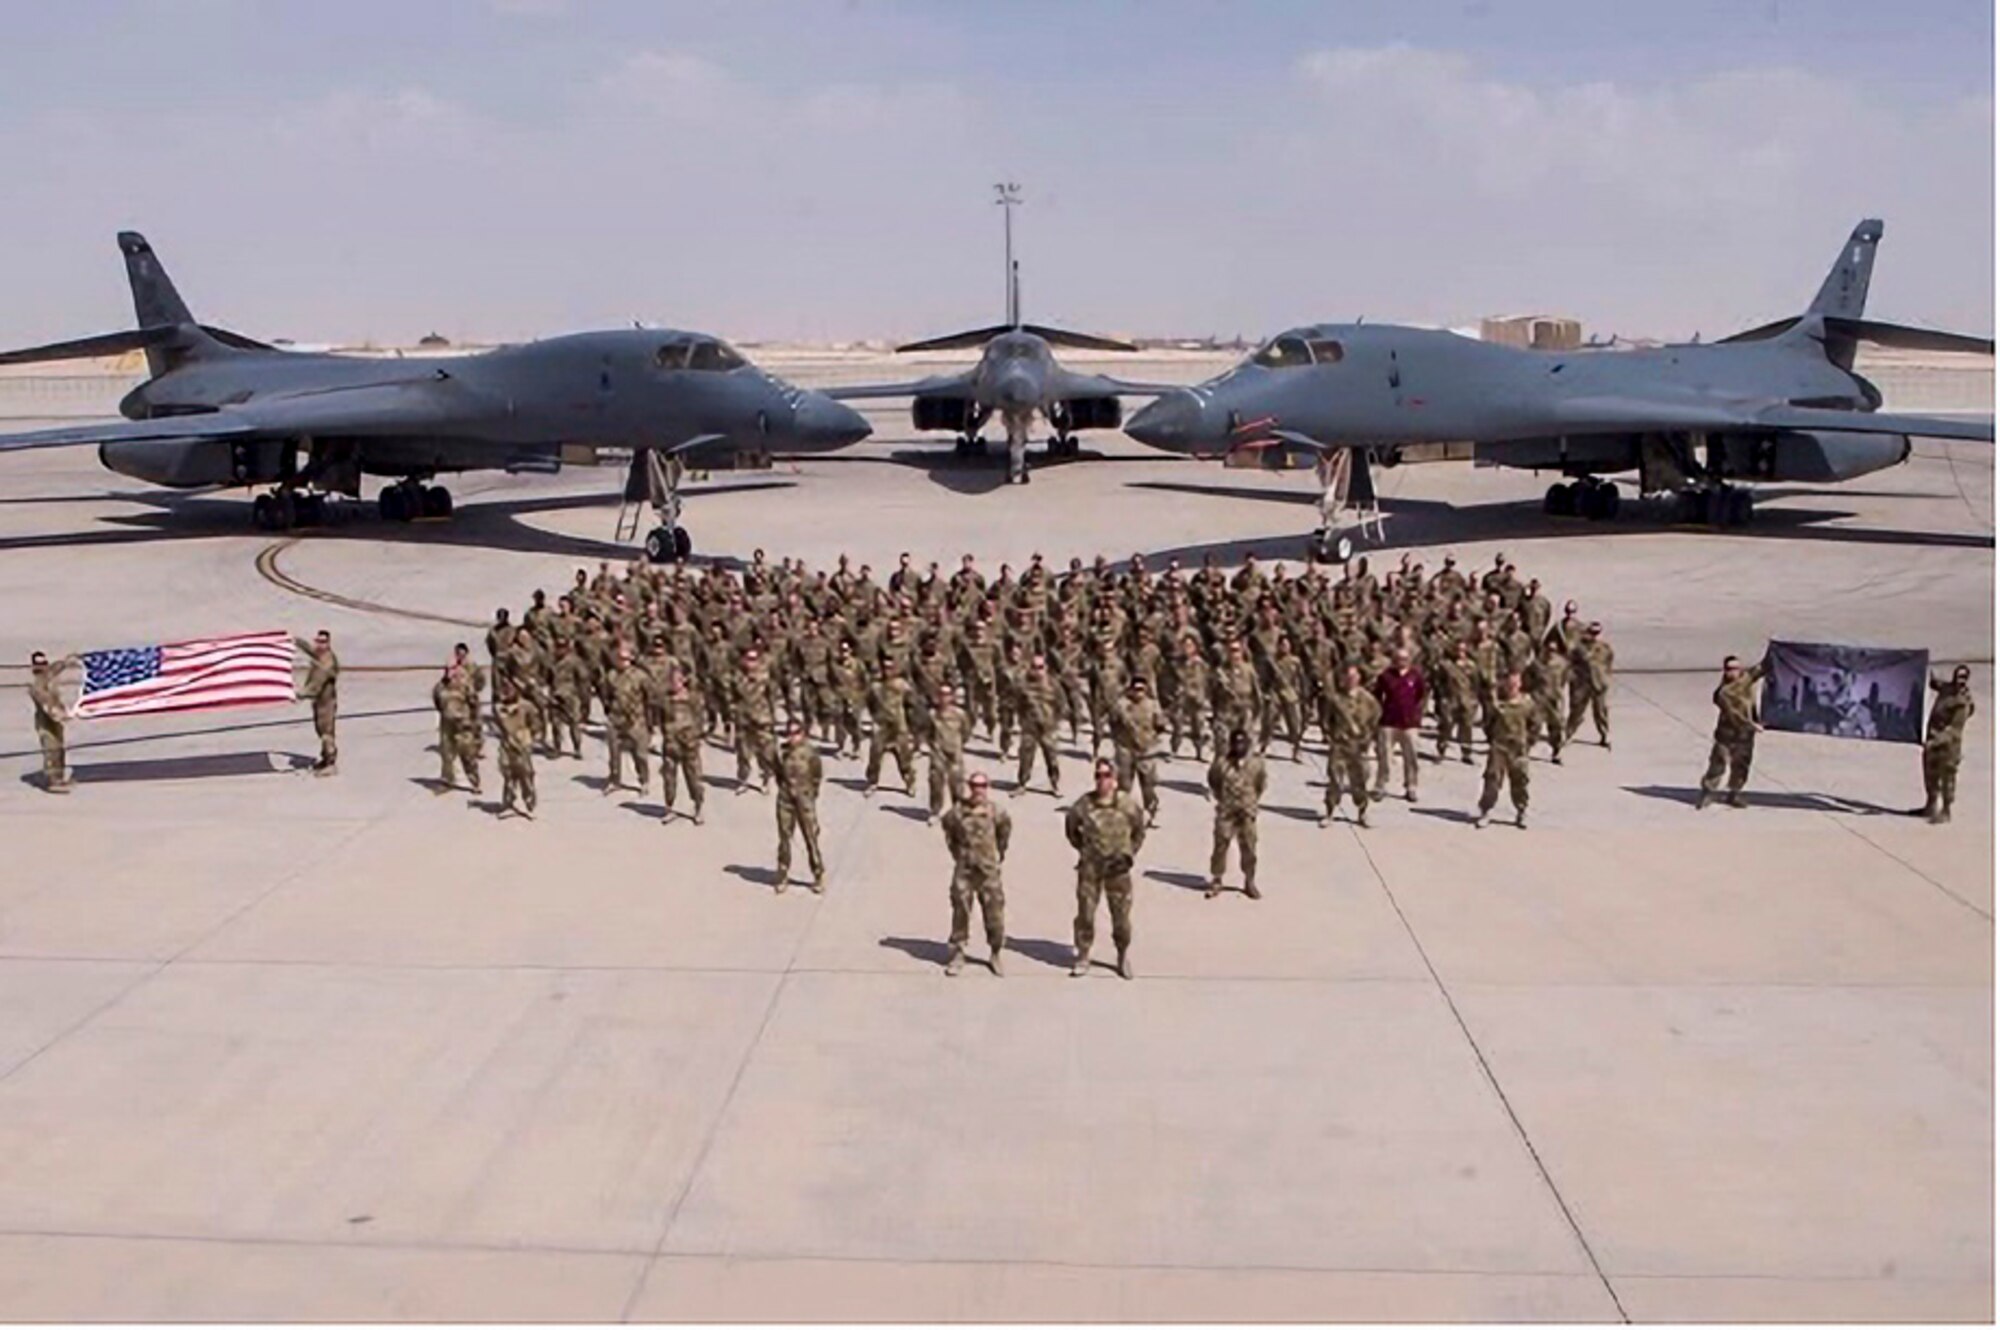 The U.S. Air Force 379th Expeditionary Maintenance Group poses for a group photo during Operation Freedom Sentinel and Operation Inherent Resolve at Al Udeid Air Base, Qatar, 2019.